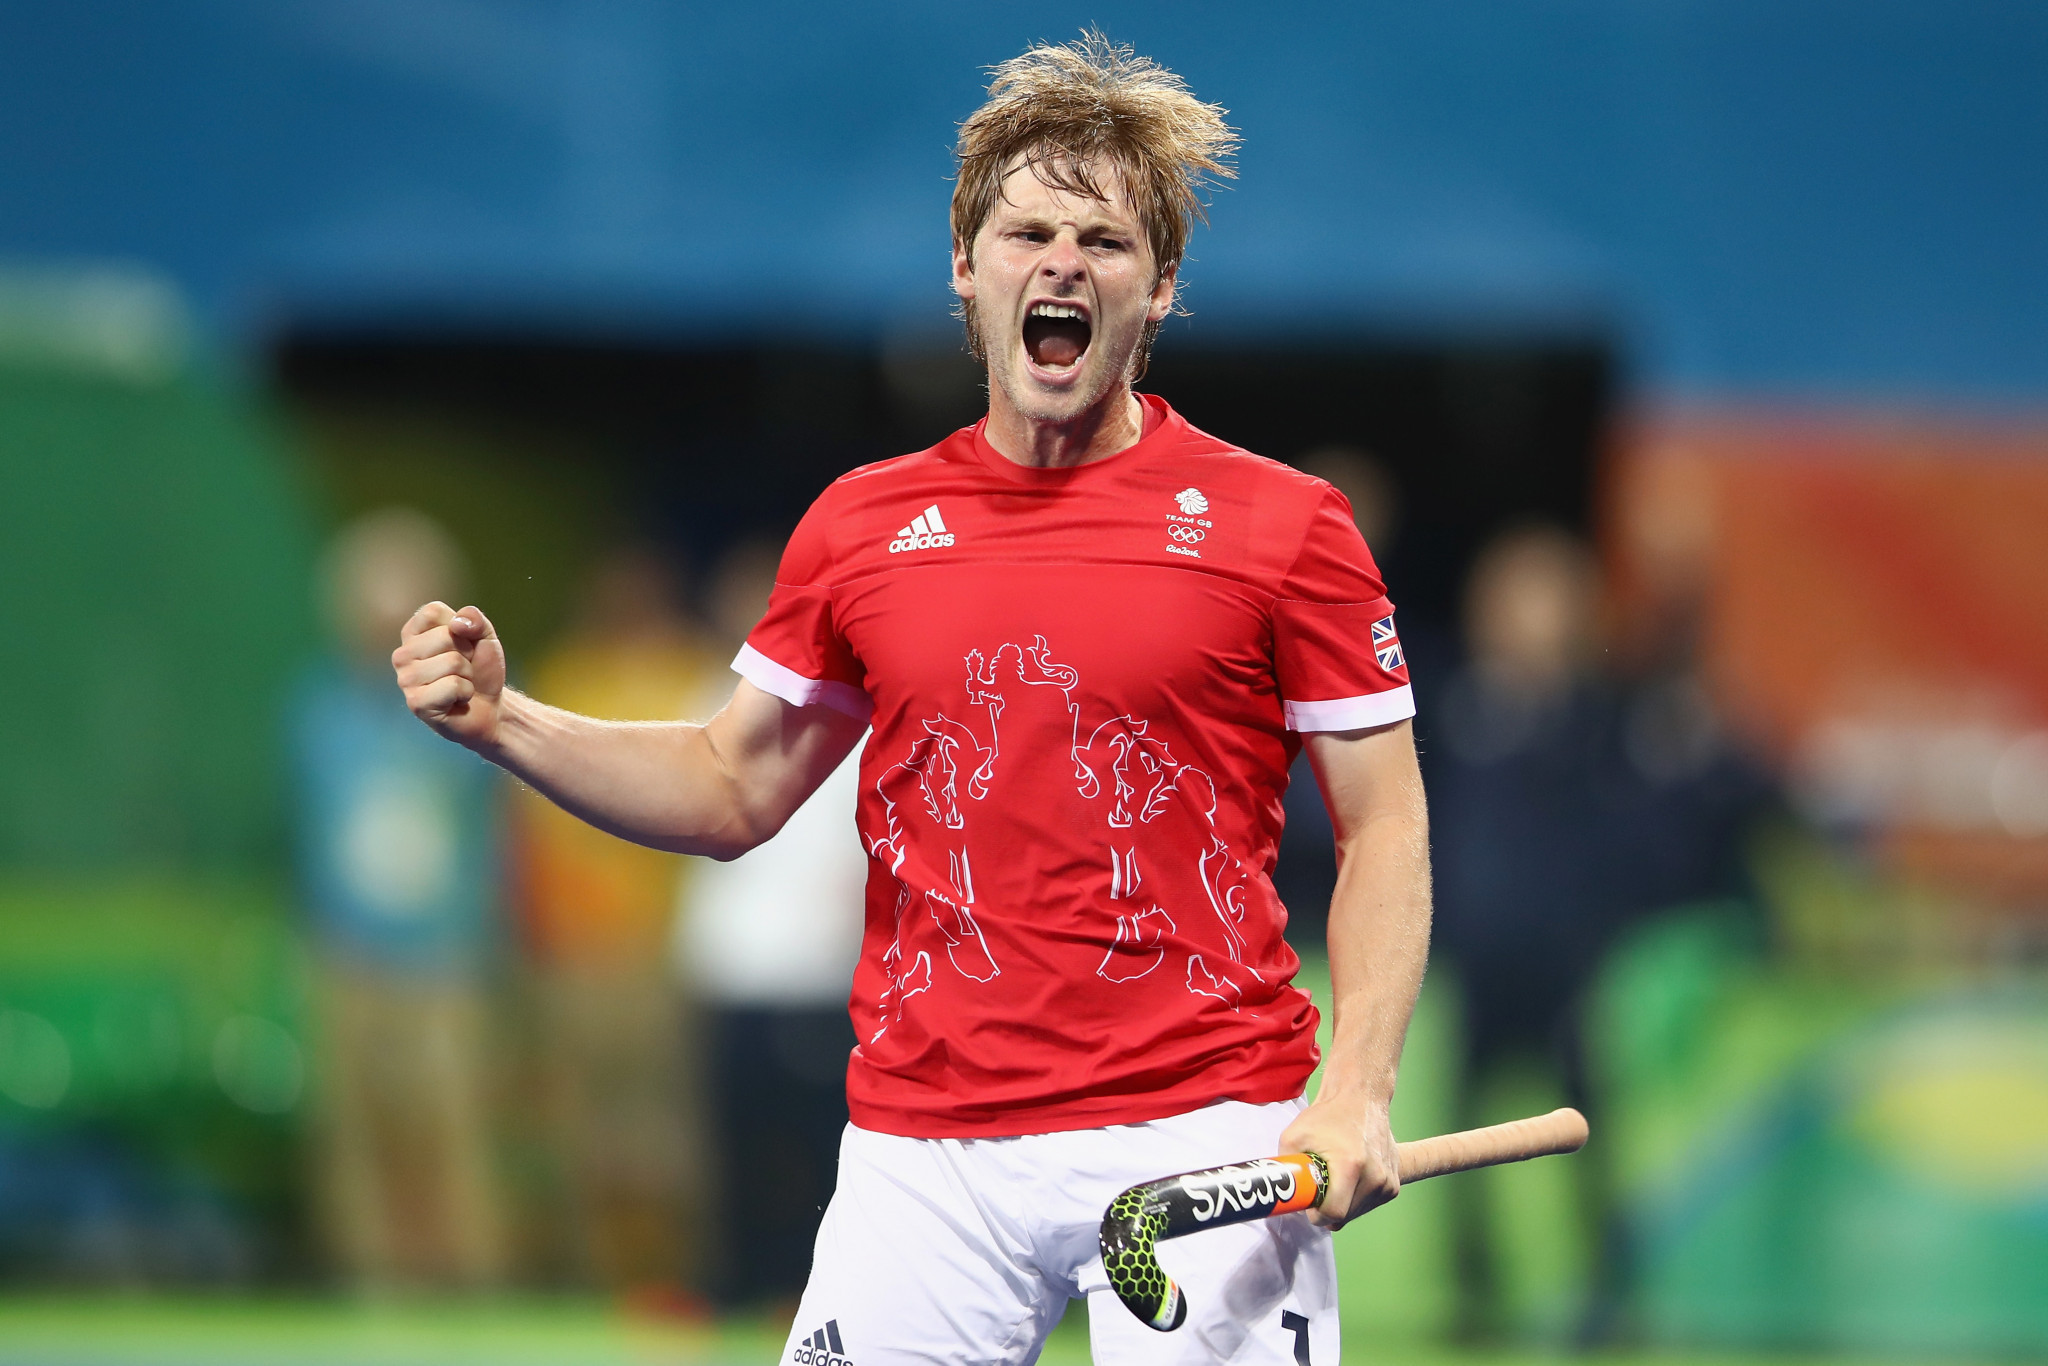 Britain's outstanding hockey talent Ashley Jackson has "stepped away" from the British programme for the Tokyo 2020 Games ©Getty Images